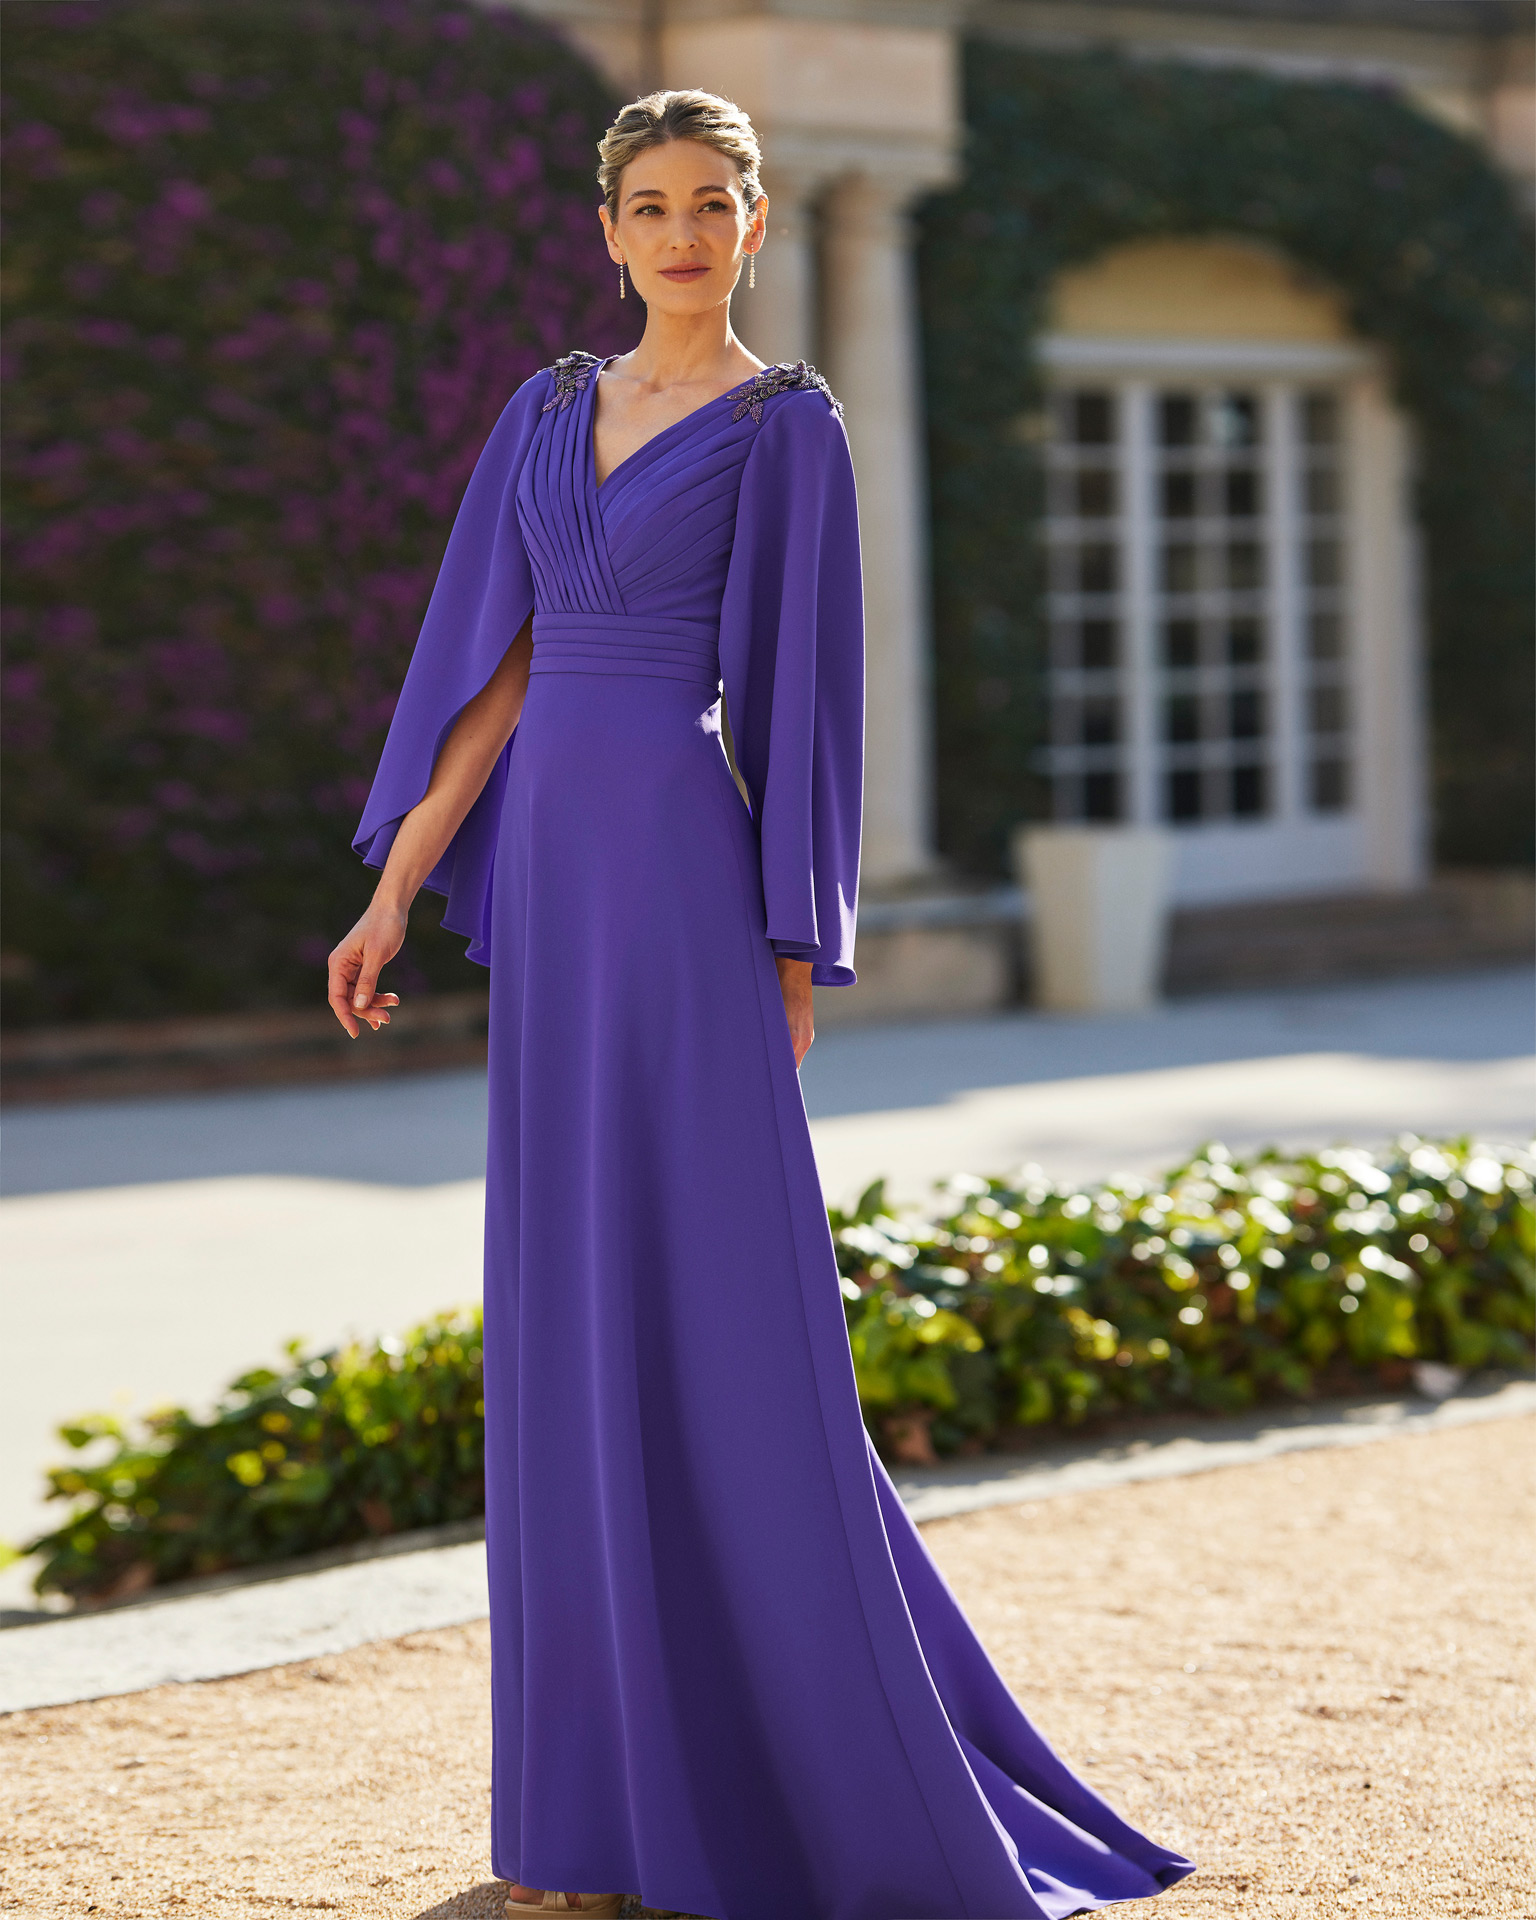 Long guest dress. Crafted in crêpe with beadwork details. With V-neckline, plunging back and butterfly sleeves. Couture Club design. MARFIL_BARCELONA.